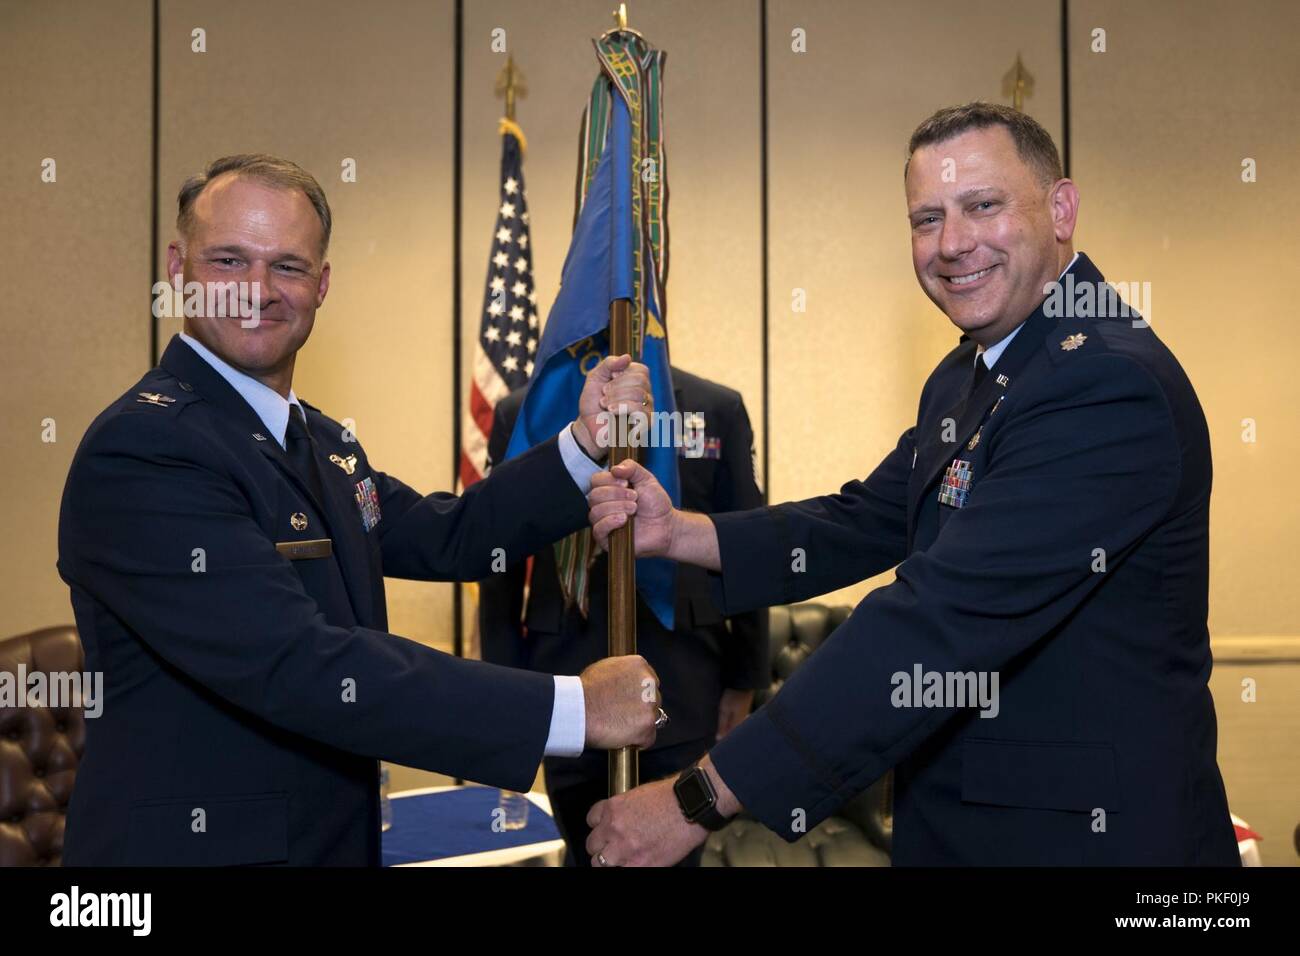 Lt. Col. Chad Gibson, right, receives the 4th Combat Camera Squadron guidon from Col. Stephen Lanier, 315th Operations Group commander, during a change of command ceremony Aug. 3, 2018, at Joint Base Charleston, S.C. By accepting the guidon, Gibson officially assumed command of the 4th CTCS. He previously served as the deputy director for Air Force Reserve Command public affairs at Robins Air Force Base, Ga. The 4th CTCS is the only Reserve combat camera unit and is a rapid response force, specializing in aerial documentation. Stock Photo